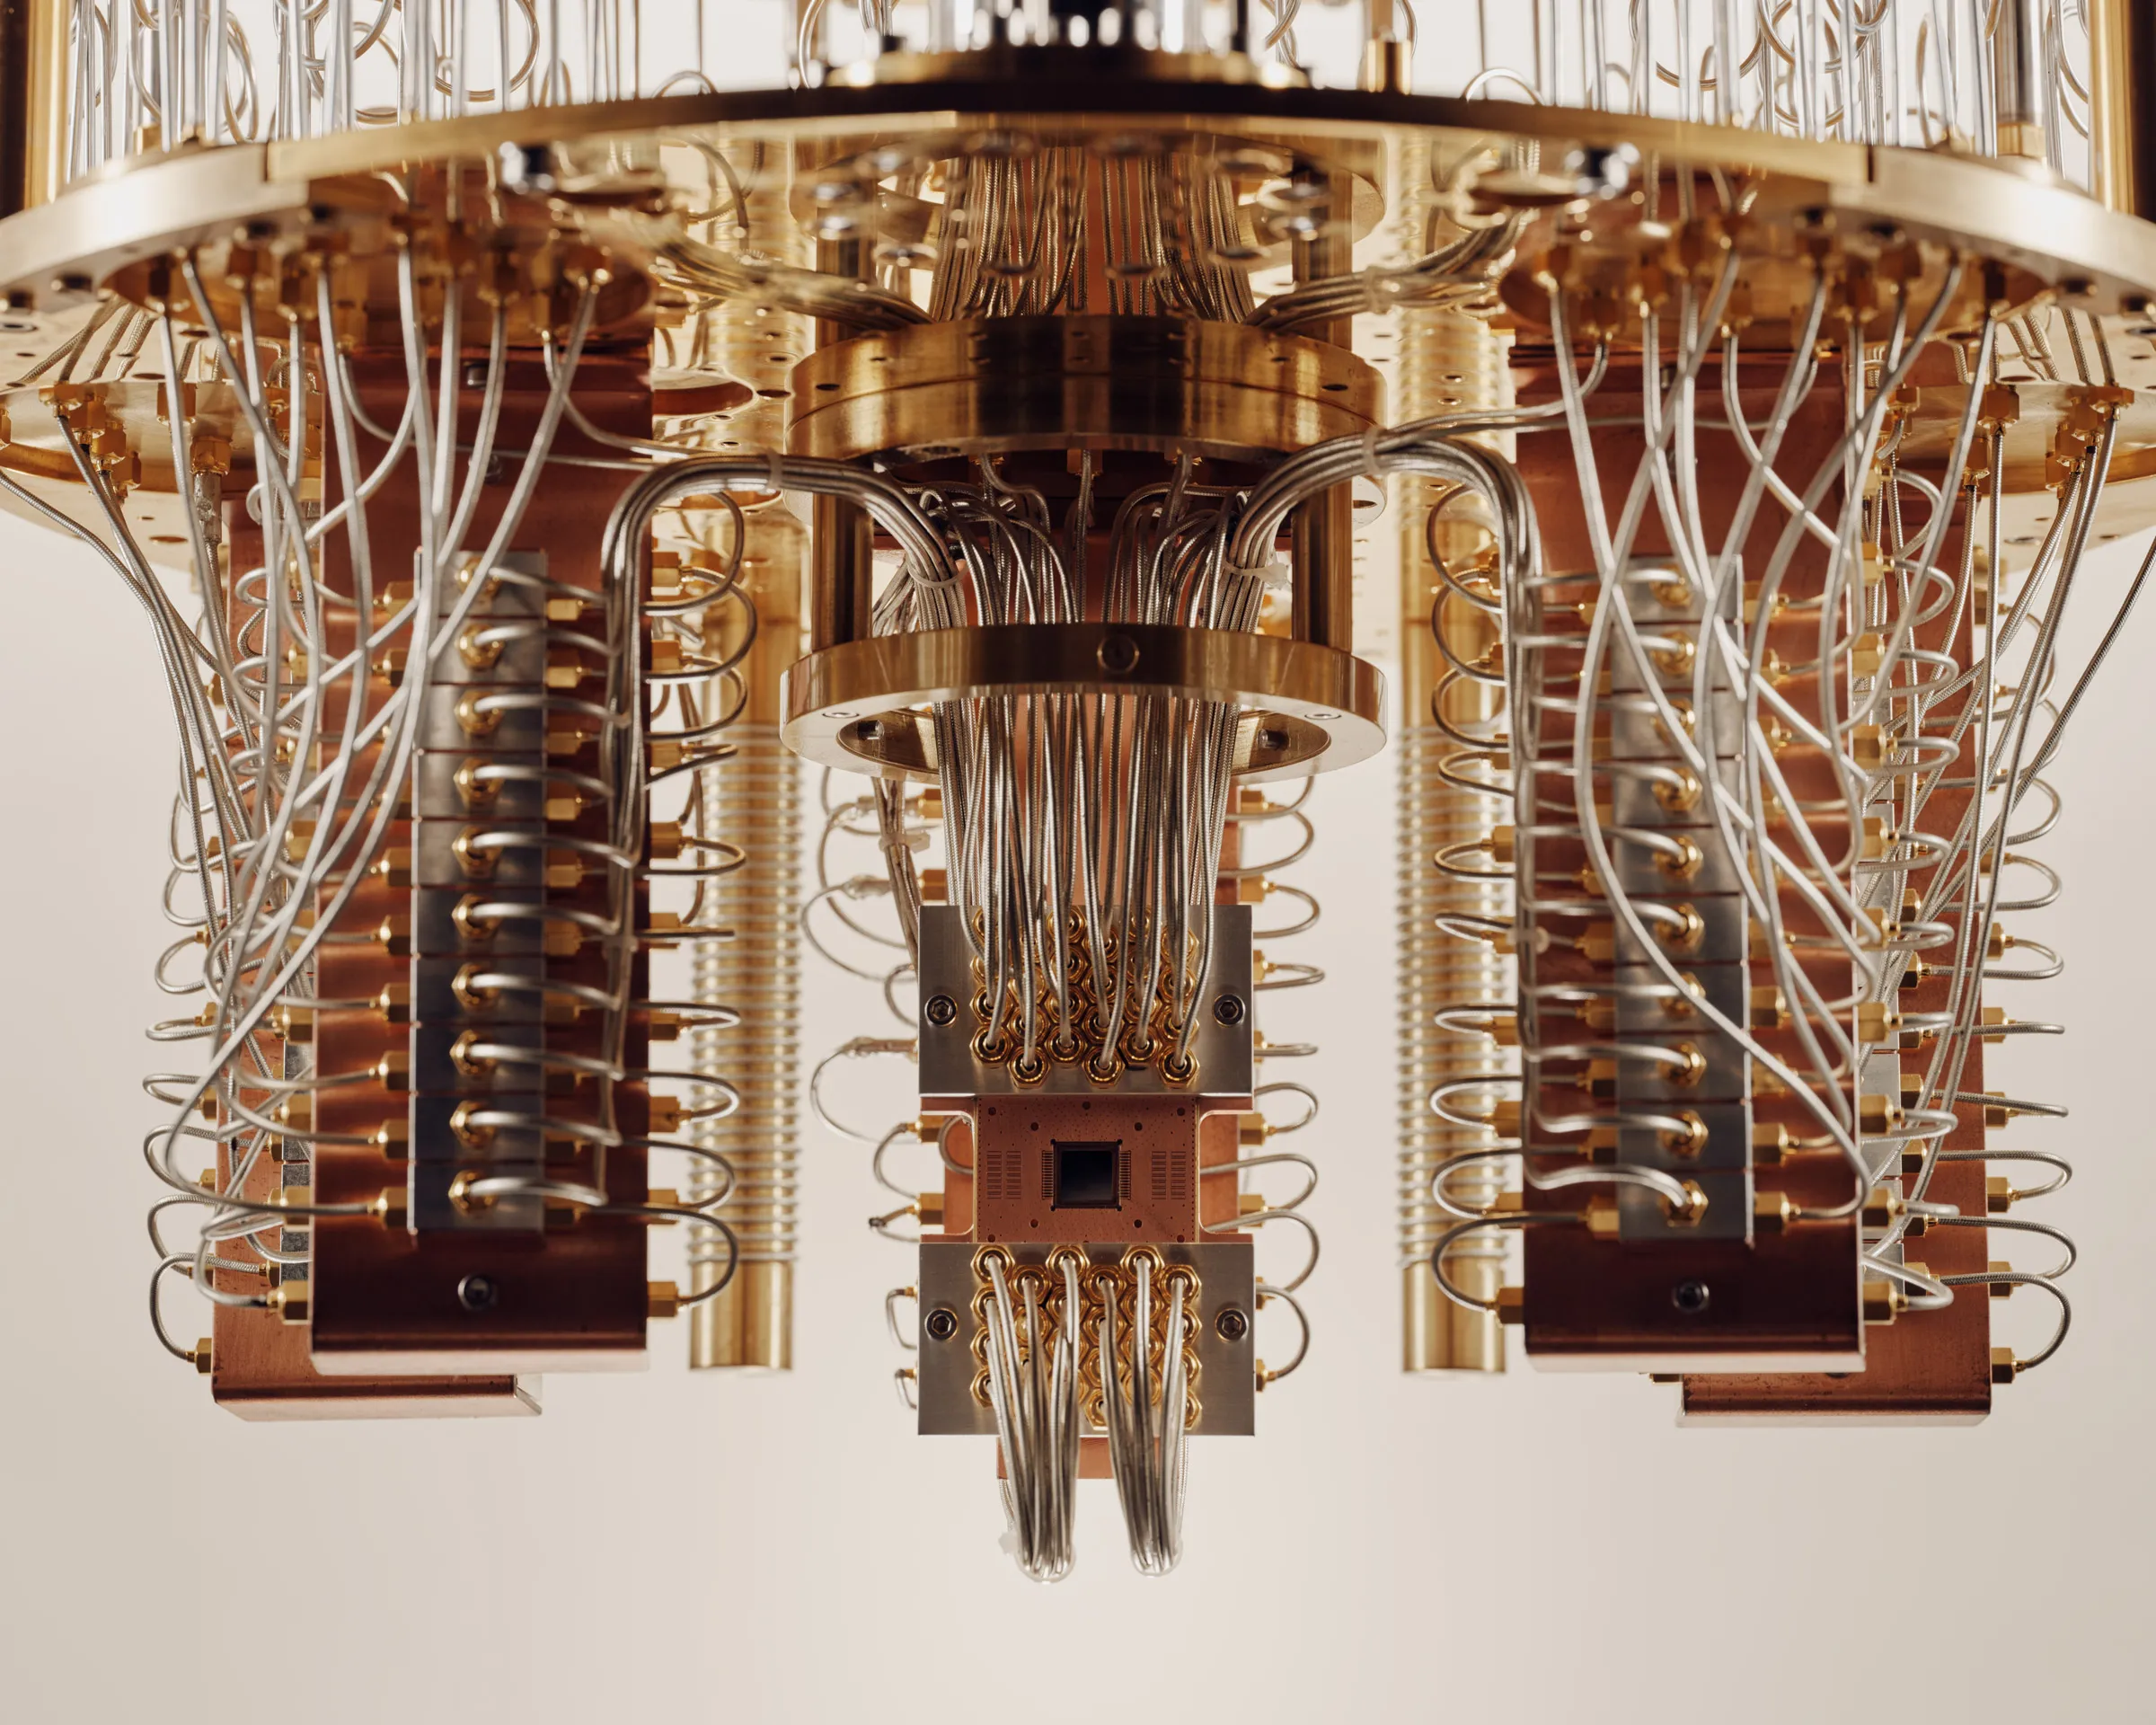 Quantum Computers: Figuring Out Problems the Future Today